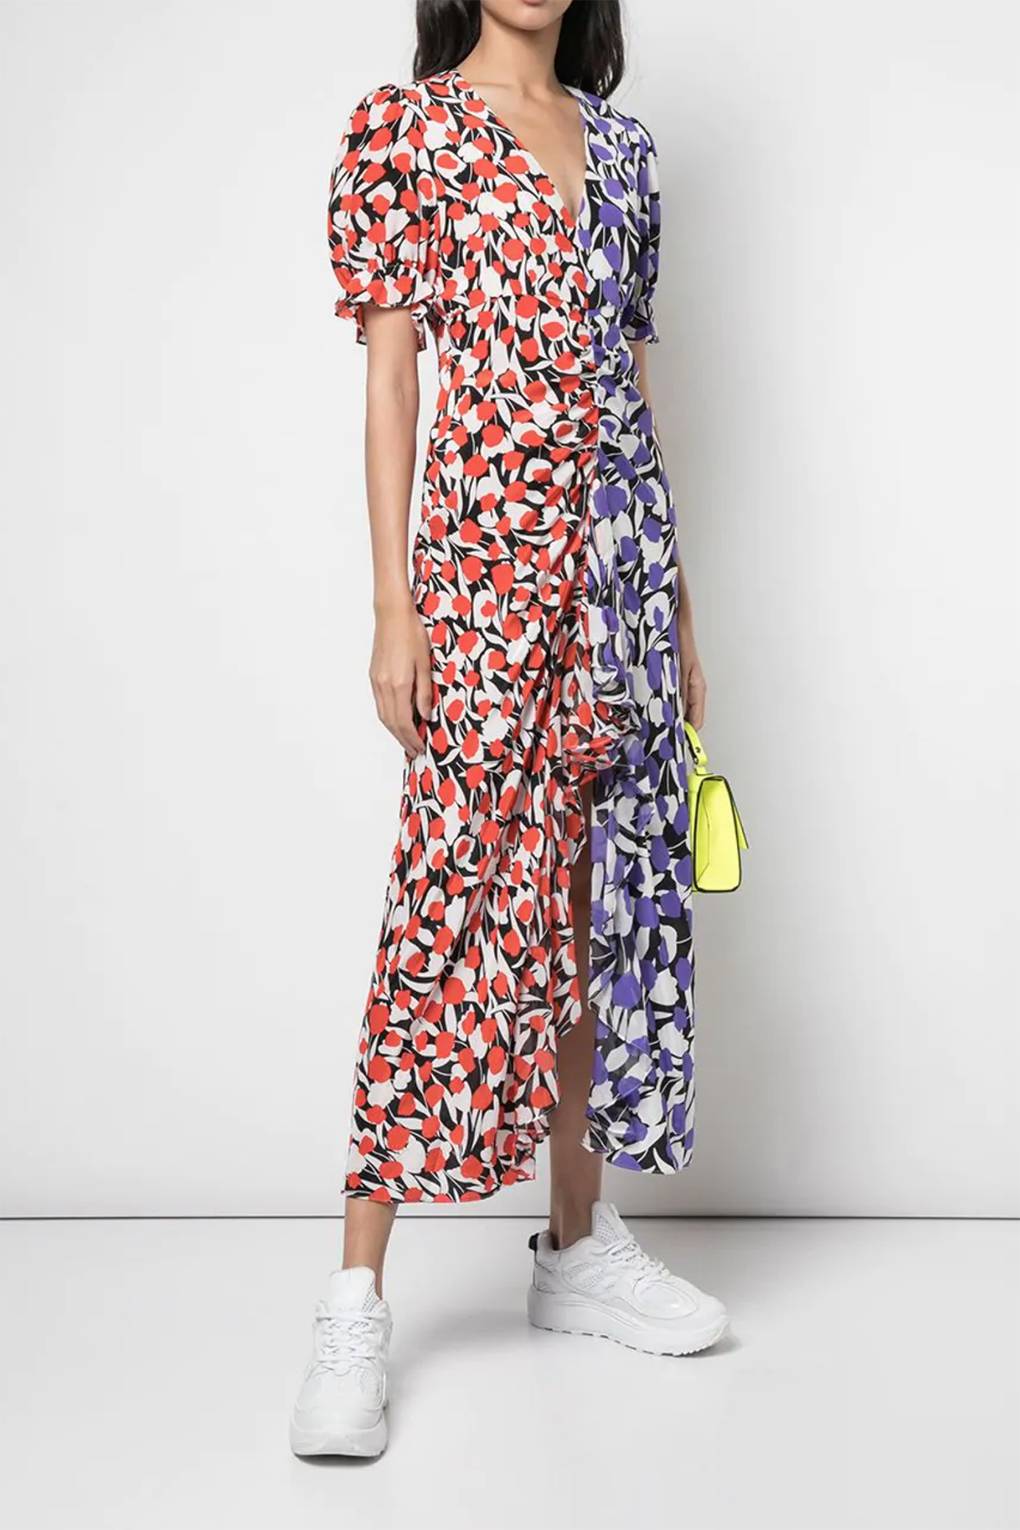 Mixed Print Dresses Are One Of The Most Unexpected Trends Of 2019 ...